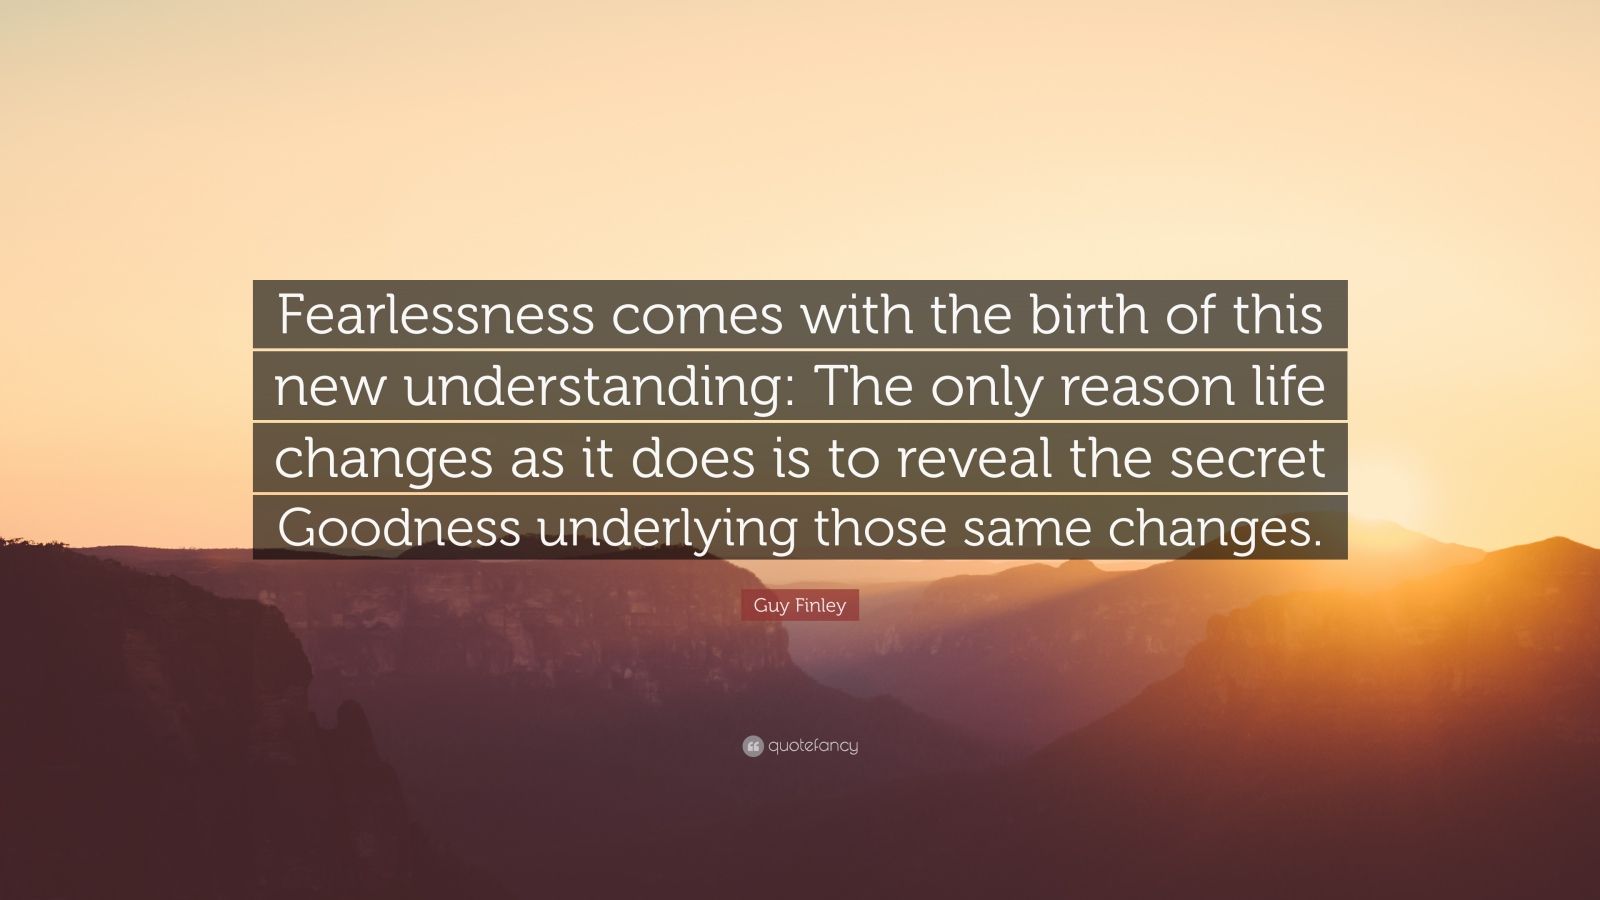 Guy Finley Quote “Fearlessness es with the birth of this new understanding The